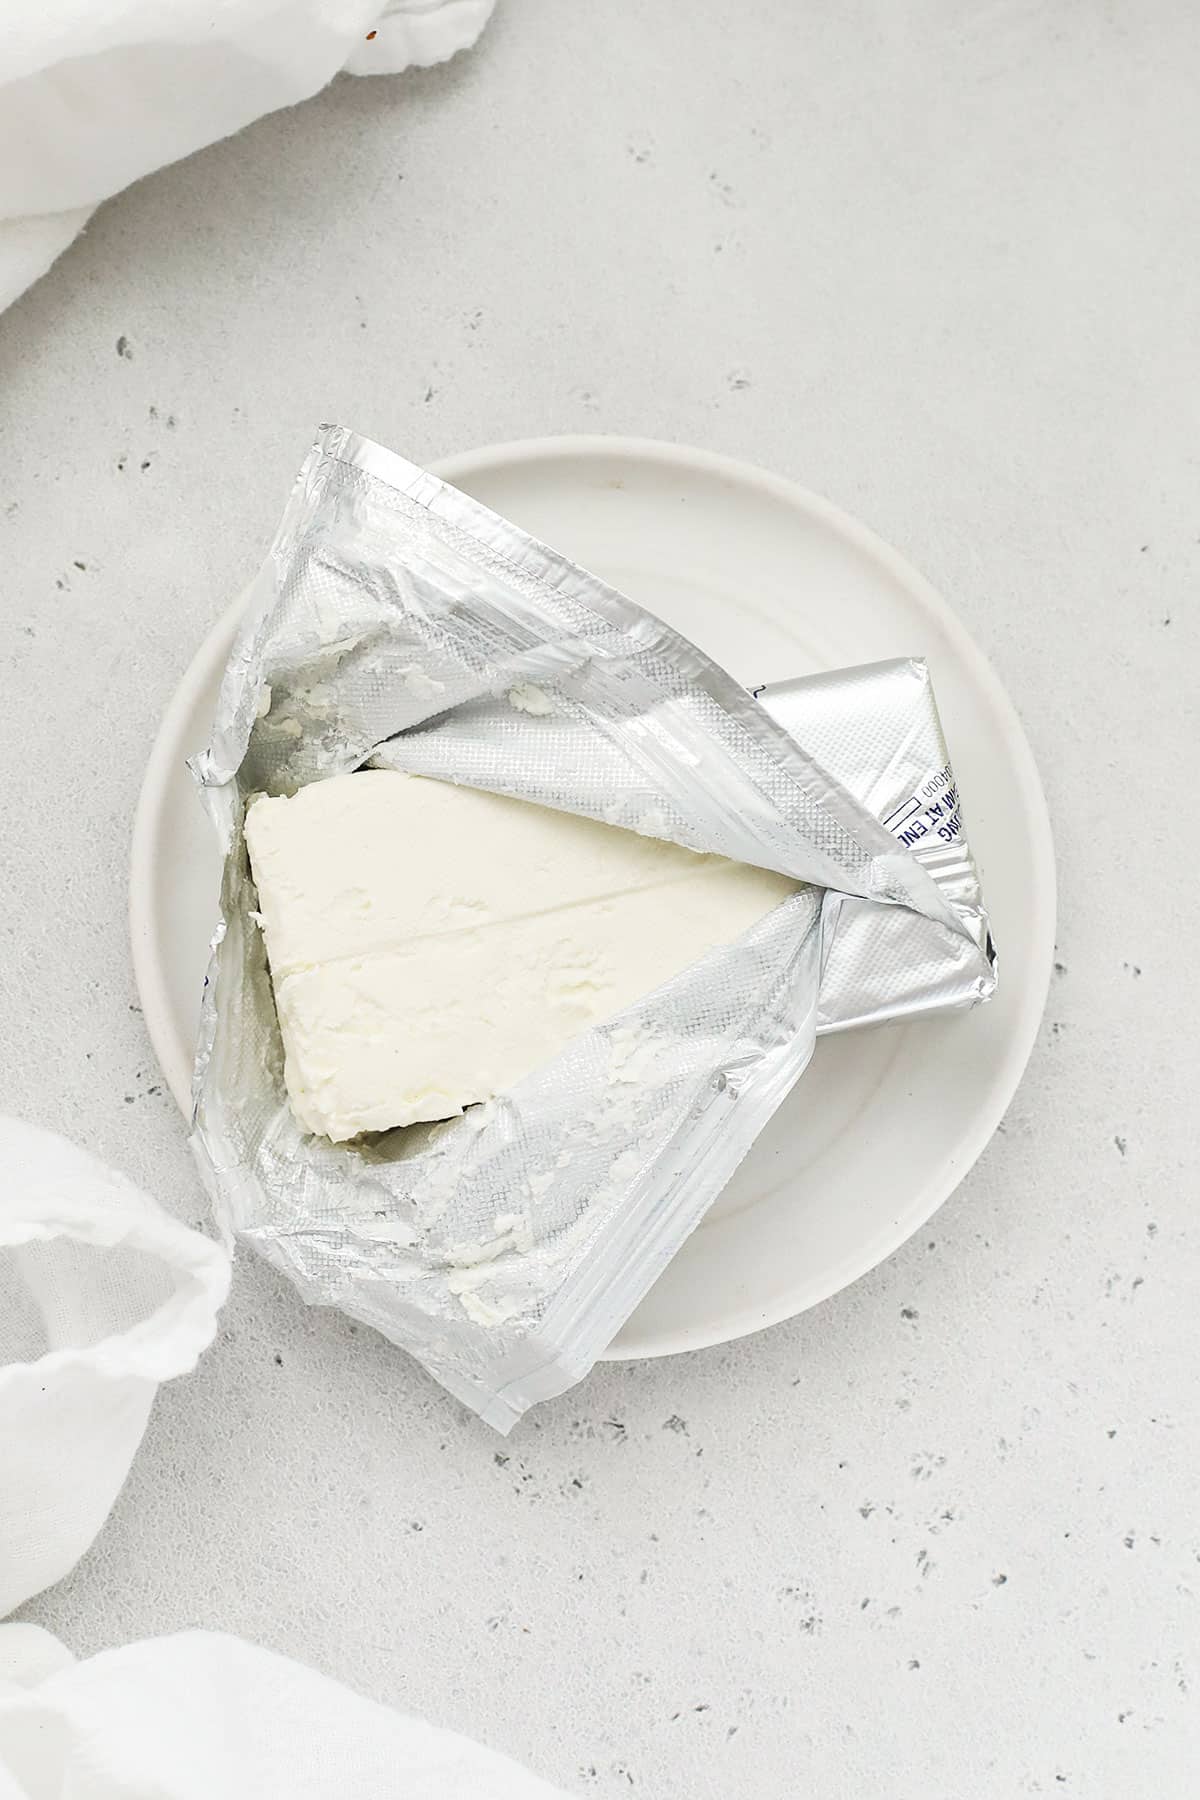 How To Soften Cream Cheese Quickly